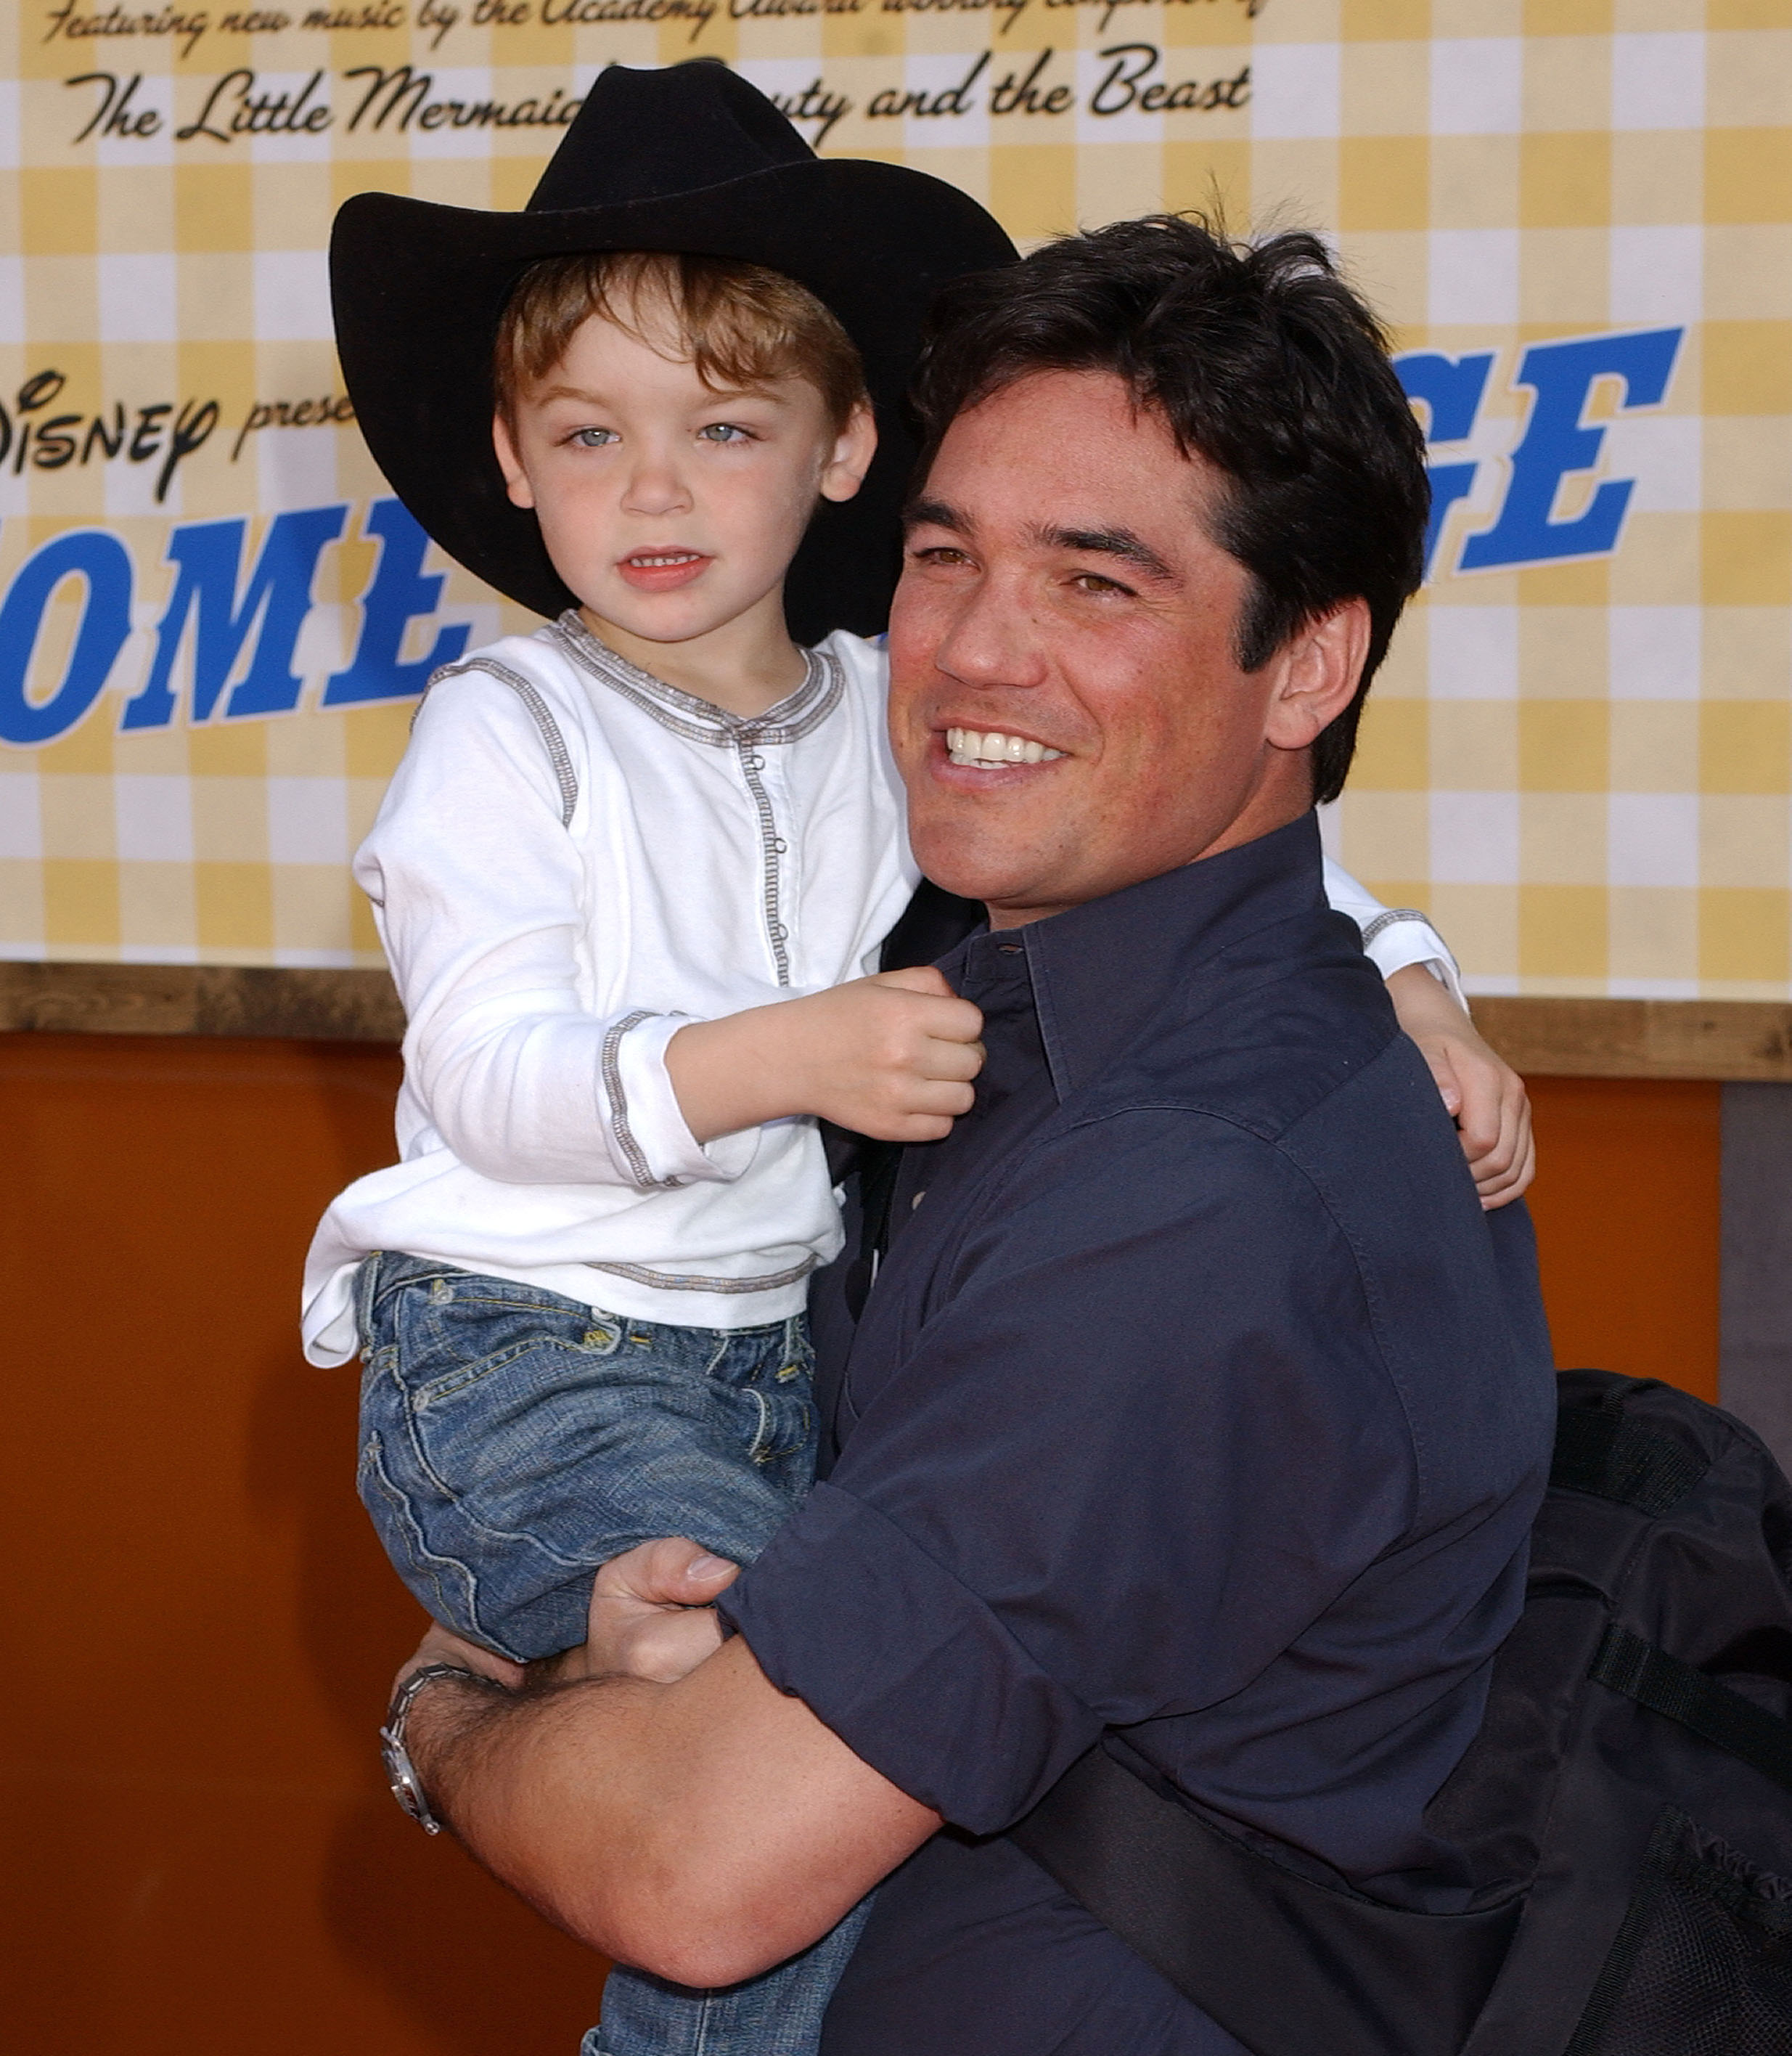 Dean Cain and his son Christopher Cain during "Home on the Range" premiere in Hollywood, California, on March 21, 2004 | Source: Getty Images